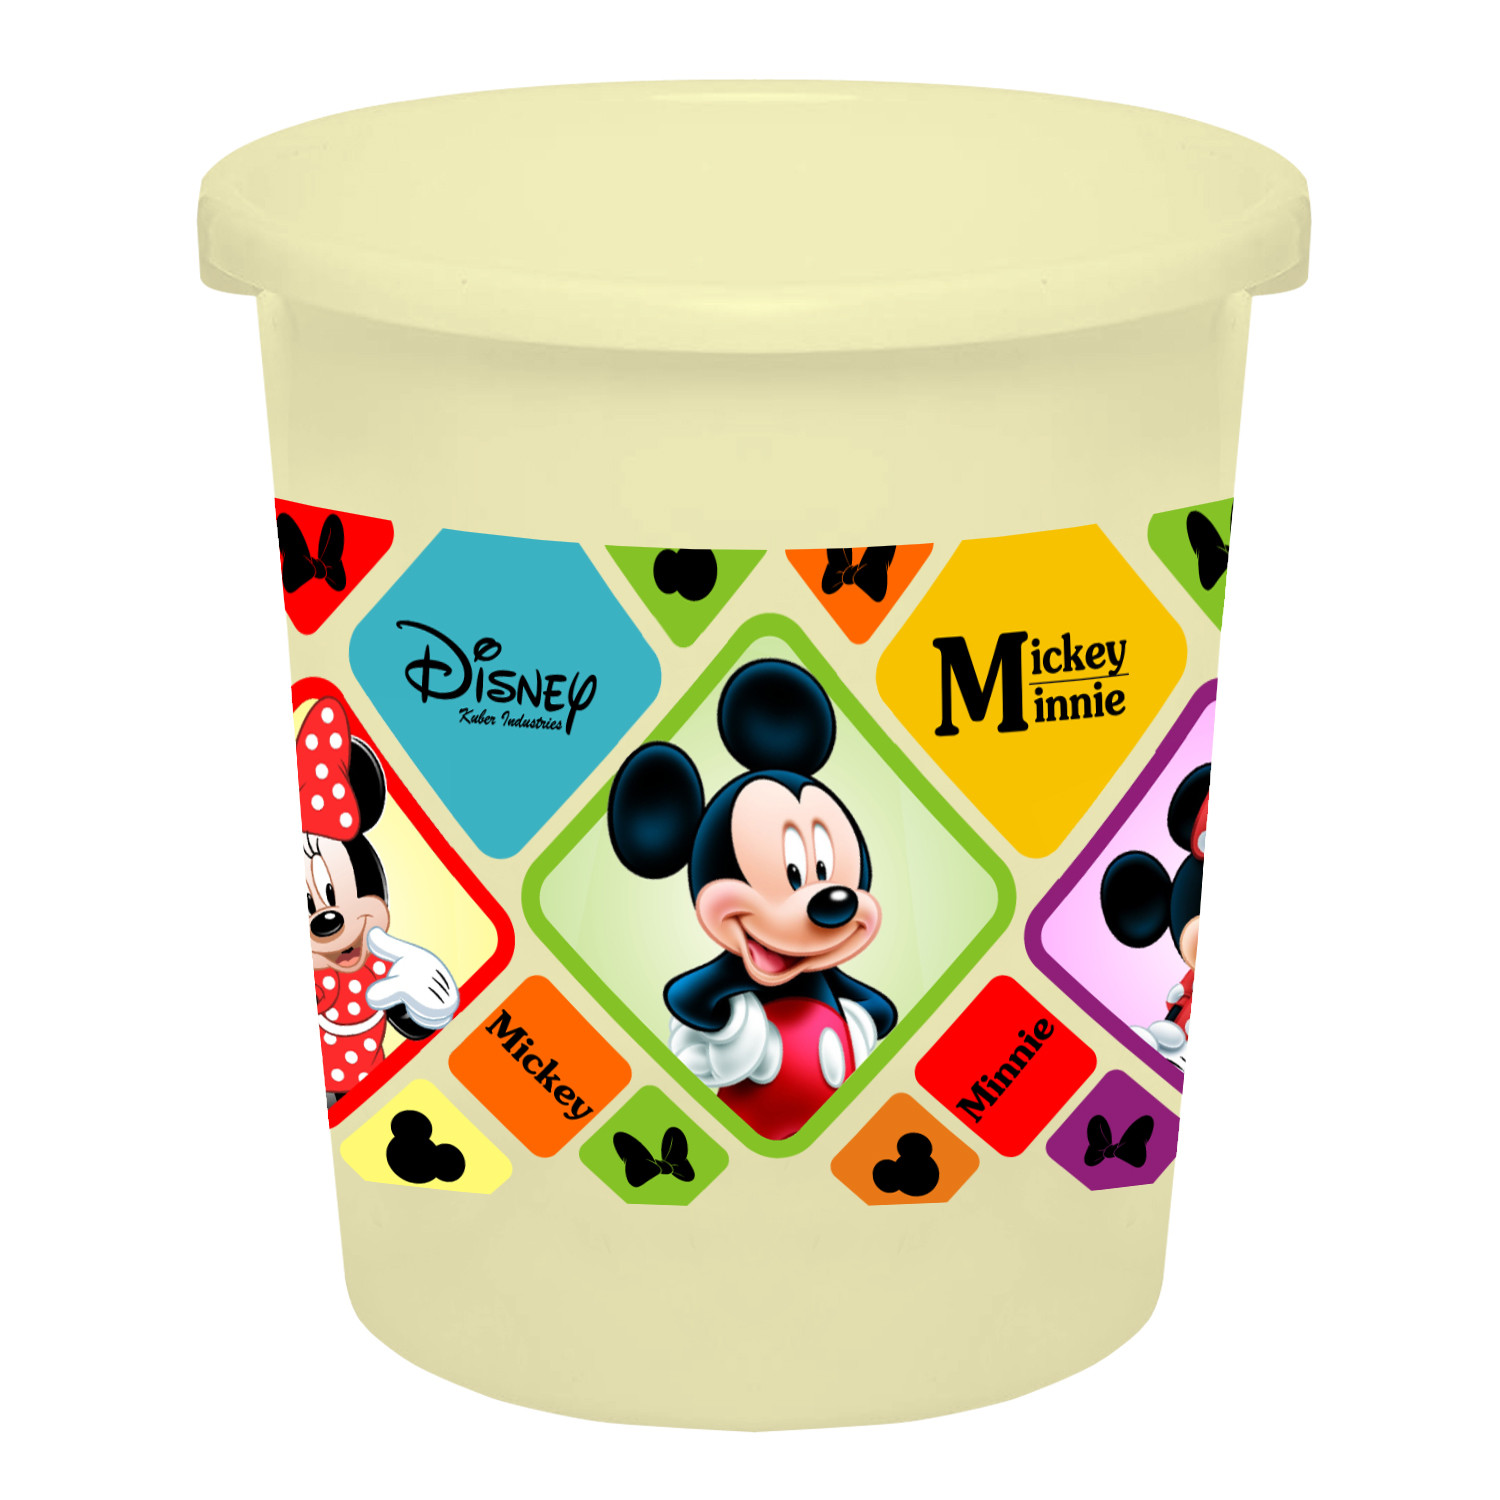 Kuber Industries Disney Mickey Minnie Print Plastic 2 Pieces Garbage Waste Dustbin/Recycling Bin for Home, Office, Factory, 5 Liters (Cream & Blue) -HS_35_KUBMART17793